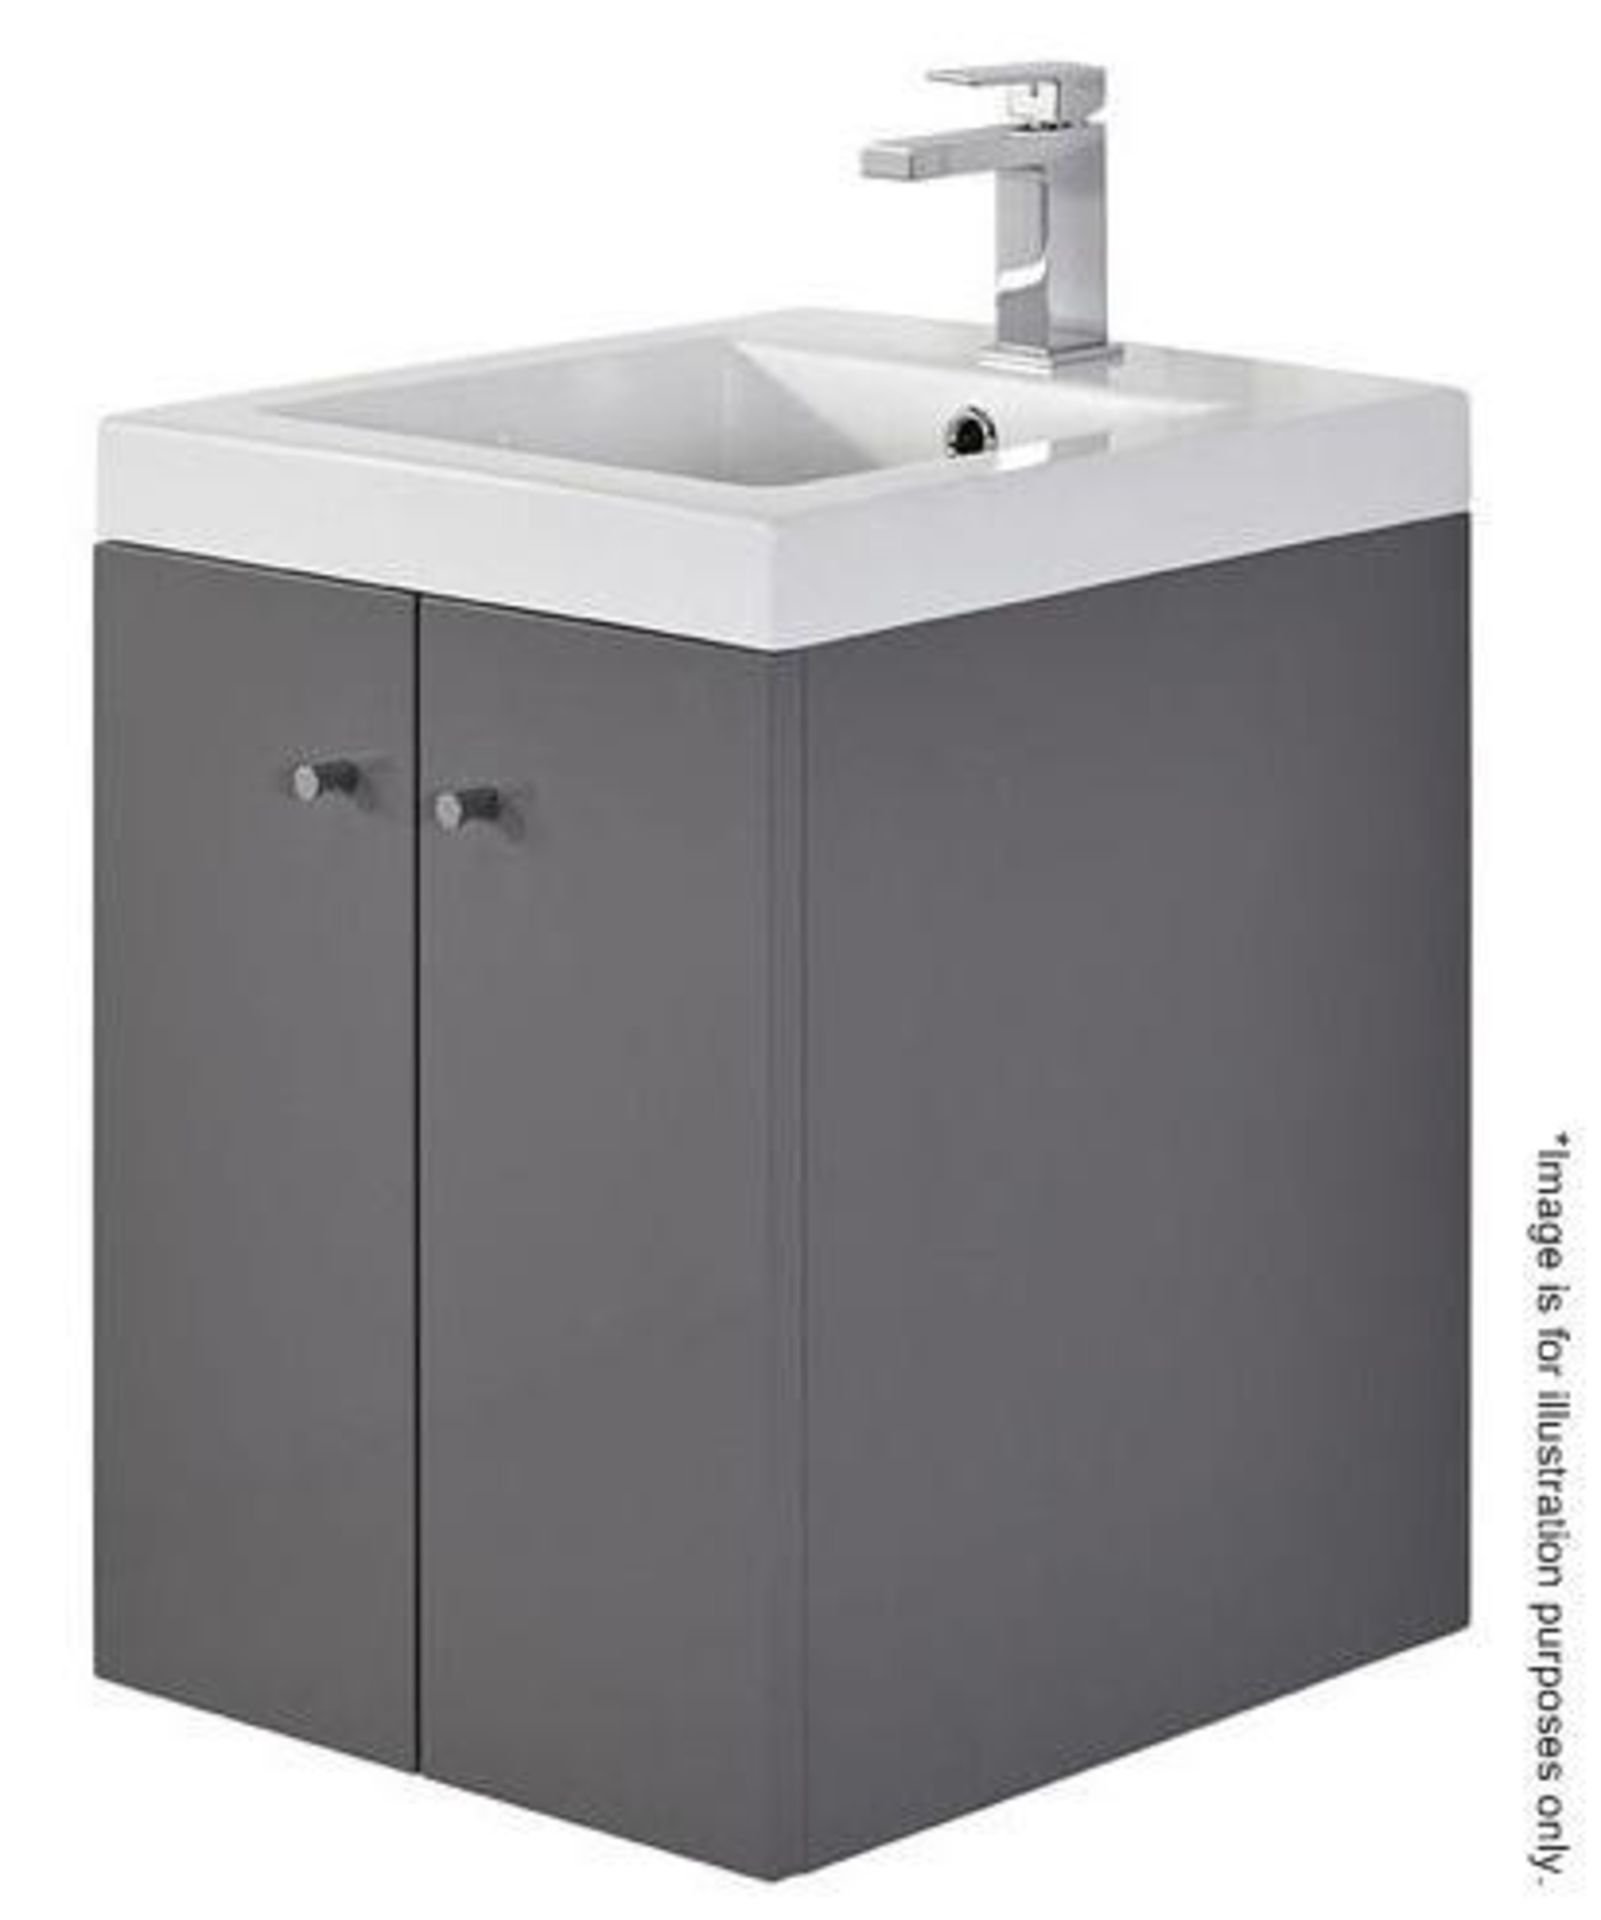 10 x Alpine Duo 400 Wall Hung Vanity Units In Gloss Grey - Brand New Boxed Stock - Dimensions: H49 x - Image 4 of 5